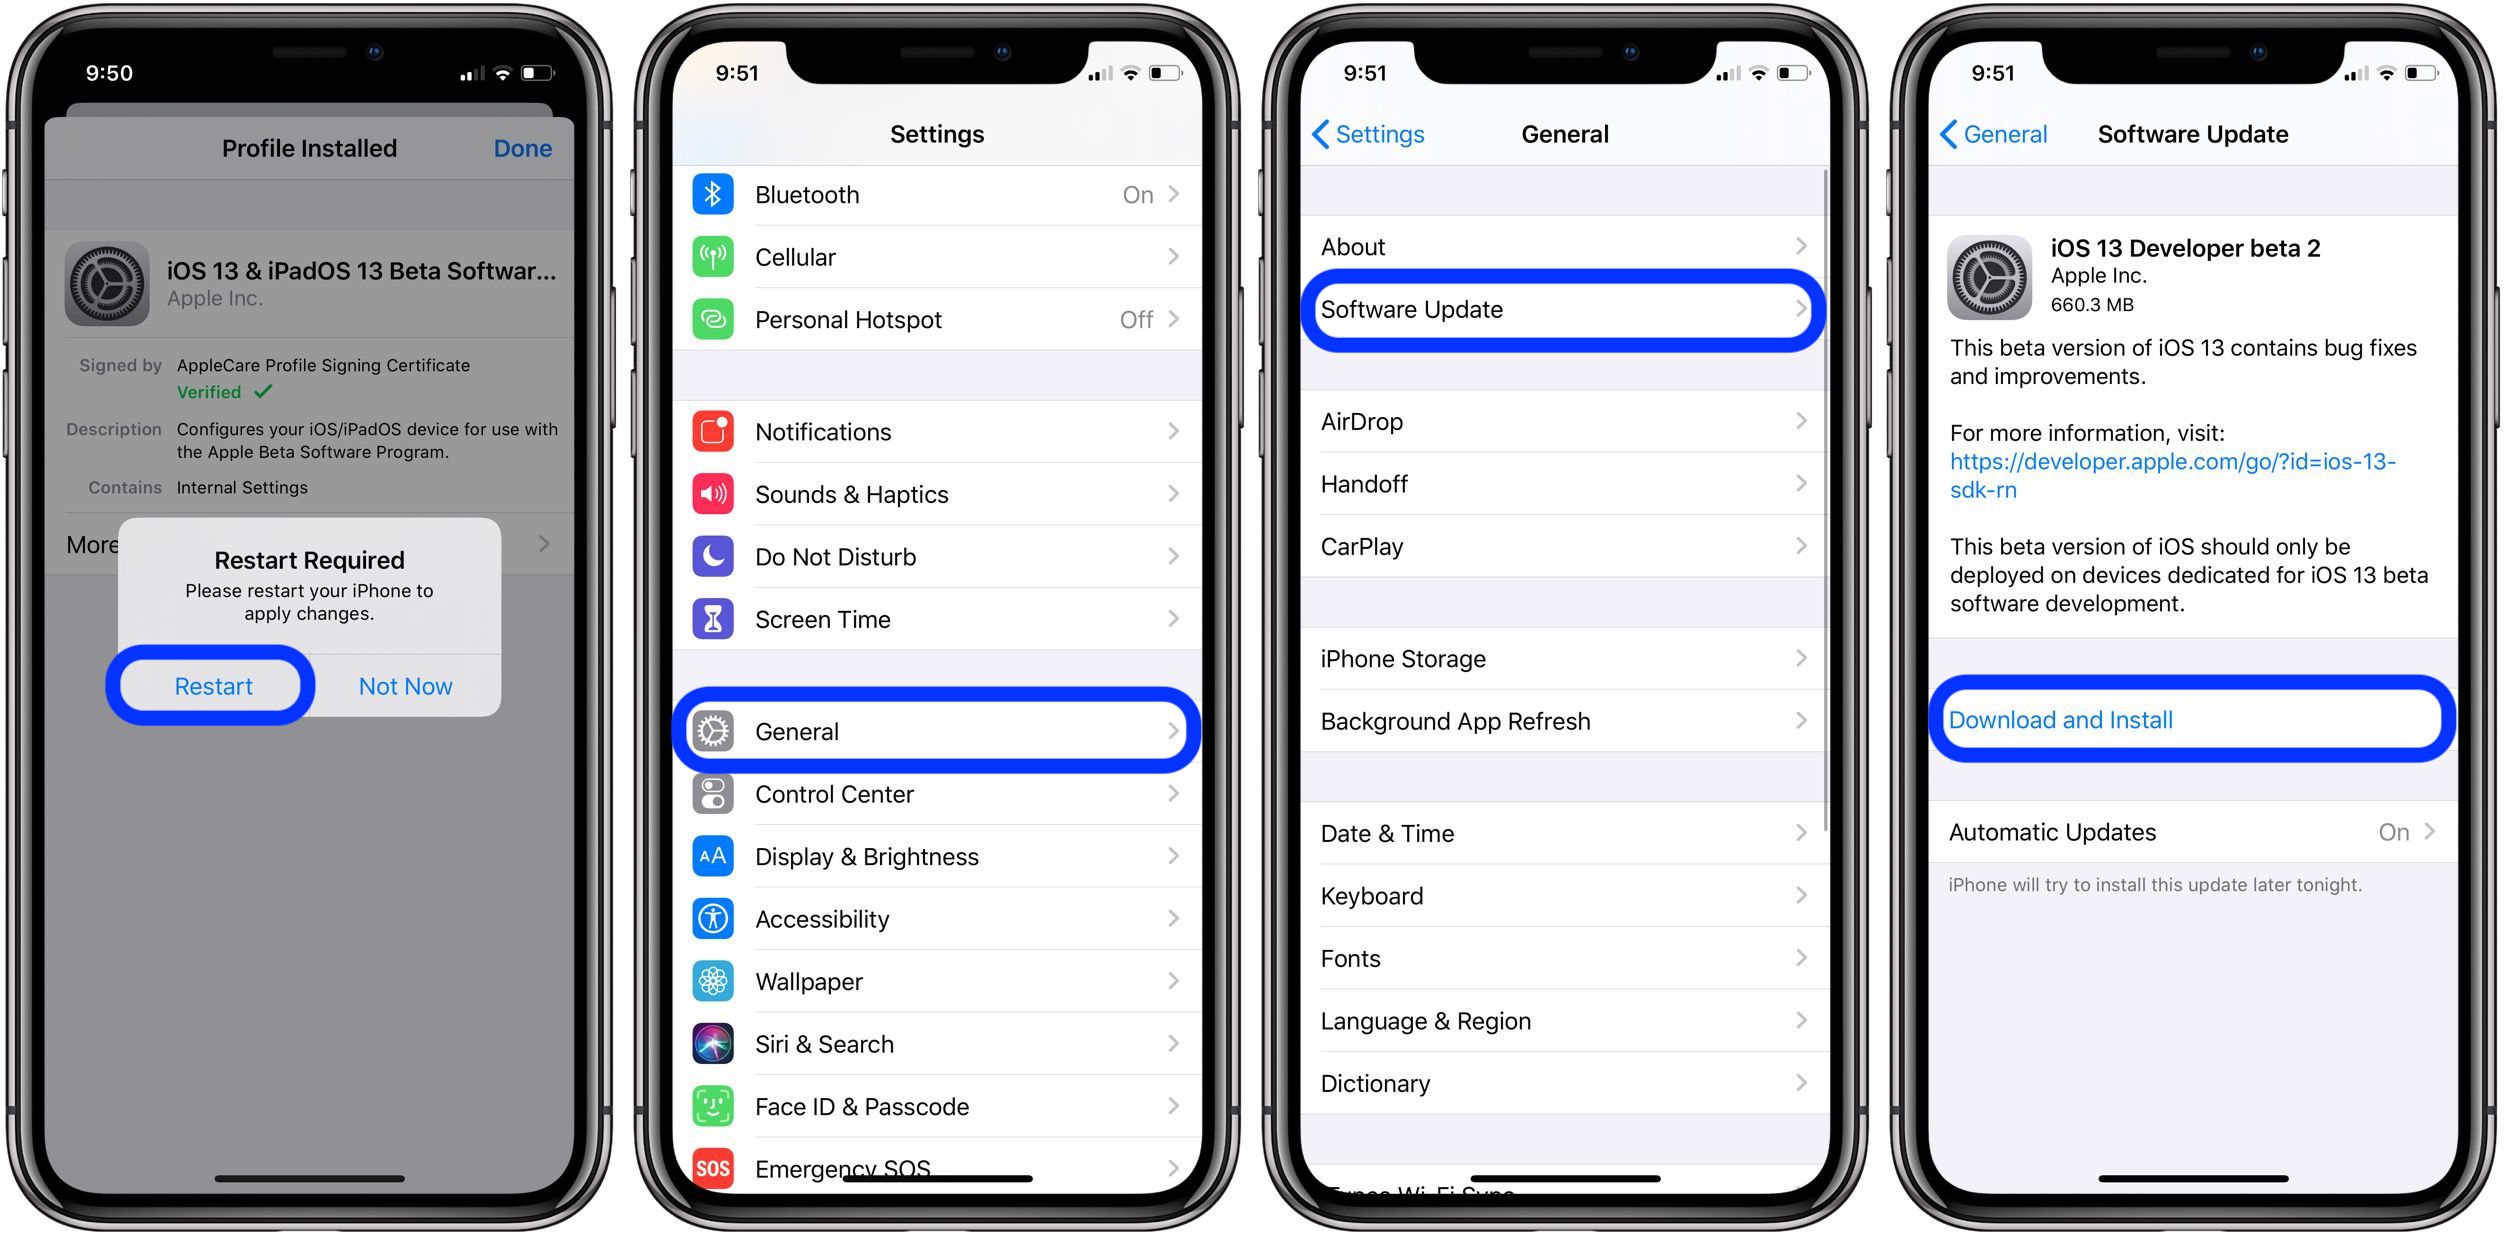 How to update iPhone and iPad to iOS 13 developer beta 2 - 9to5Mac